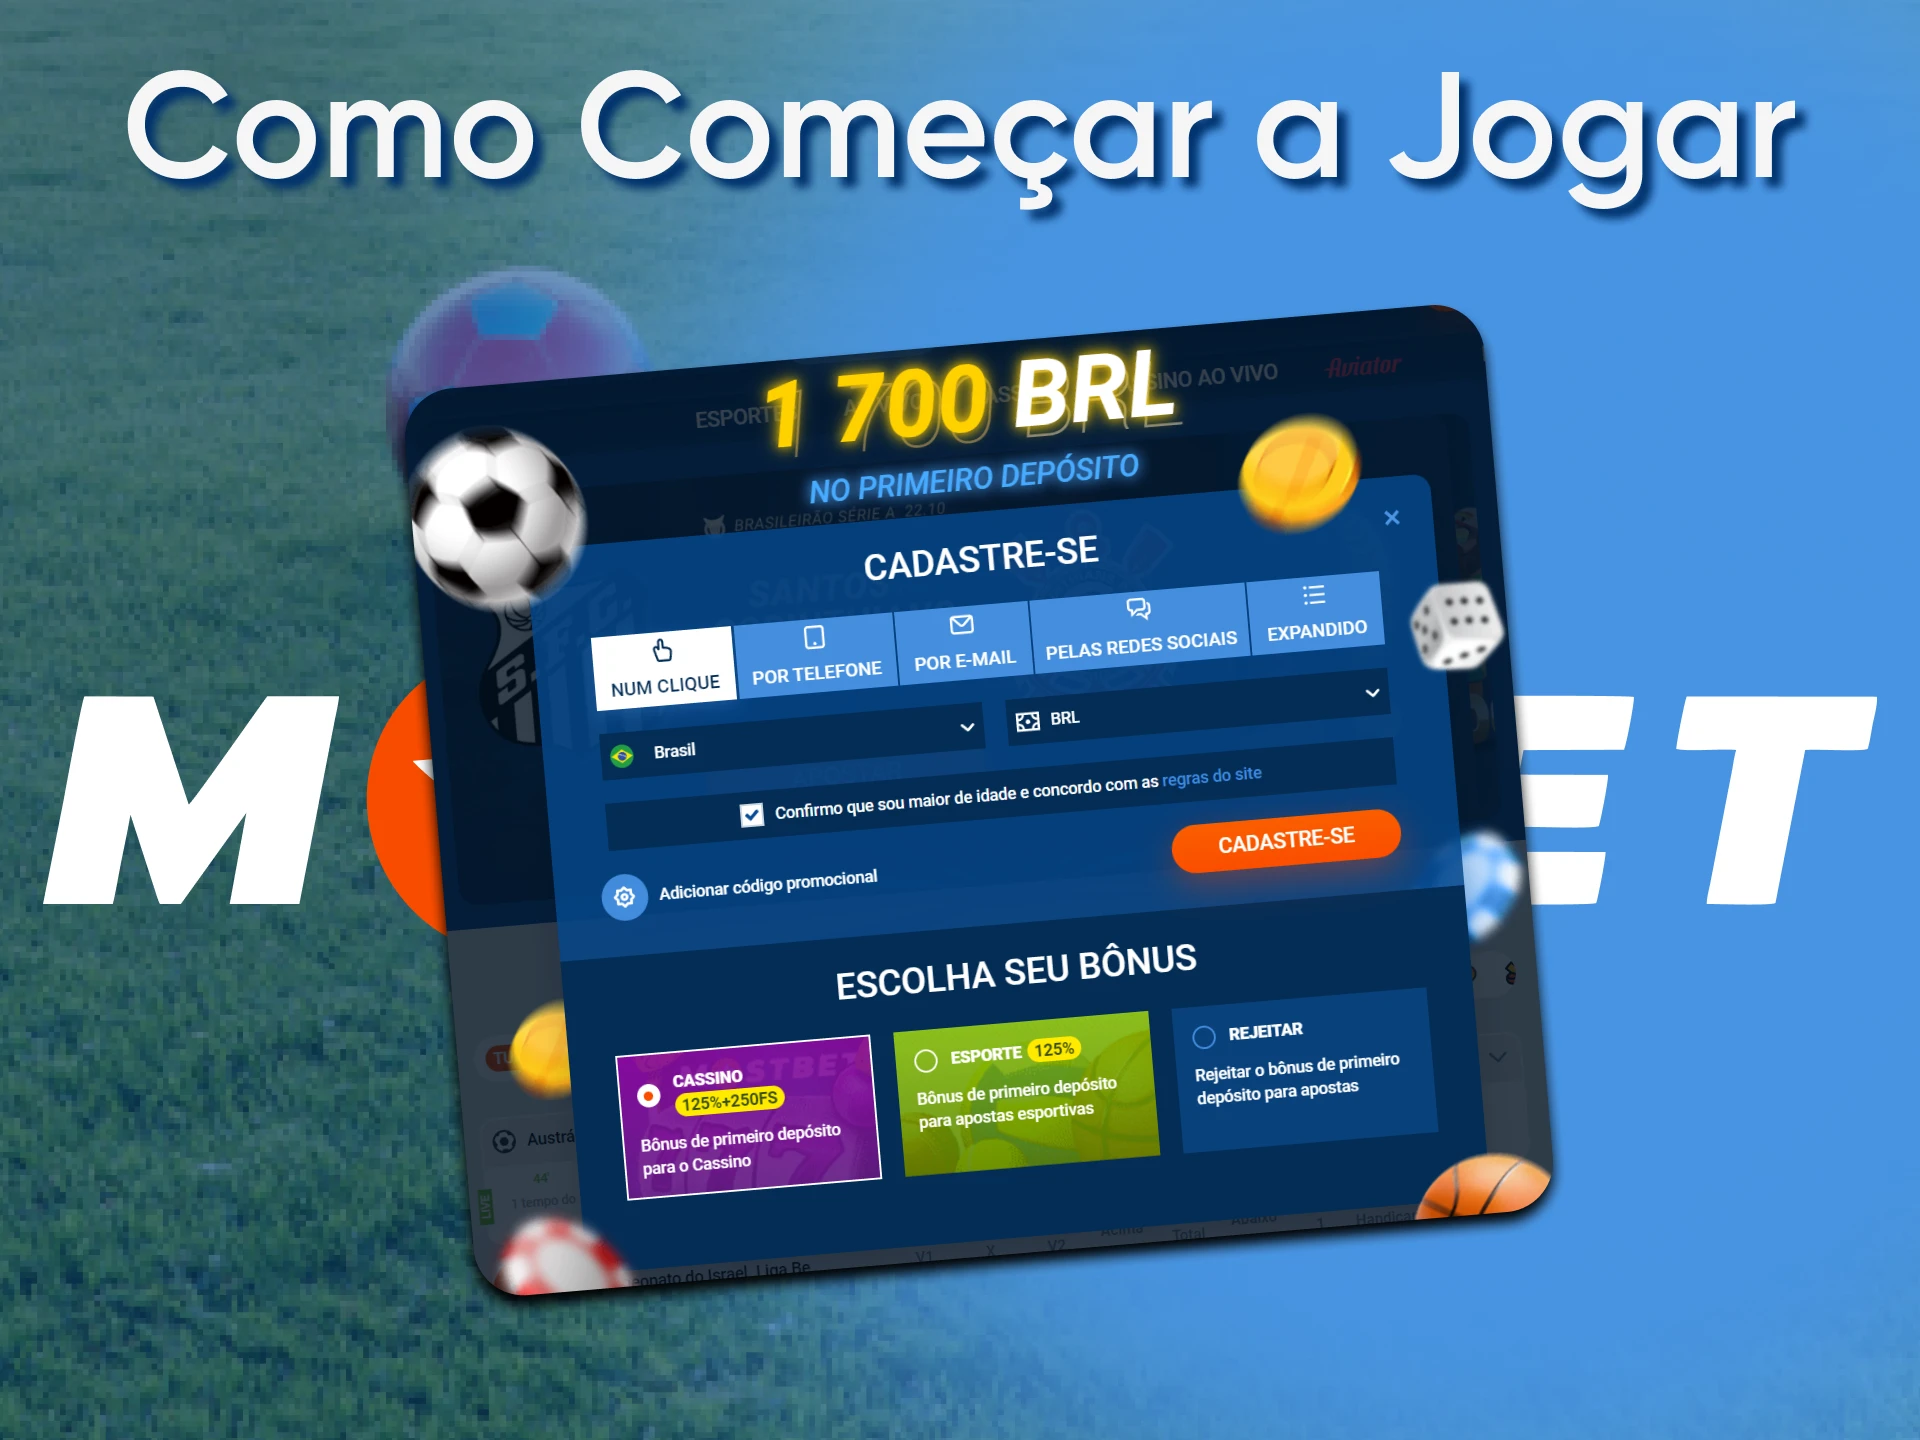 Start playing at Mostbet casino in Brazil now.